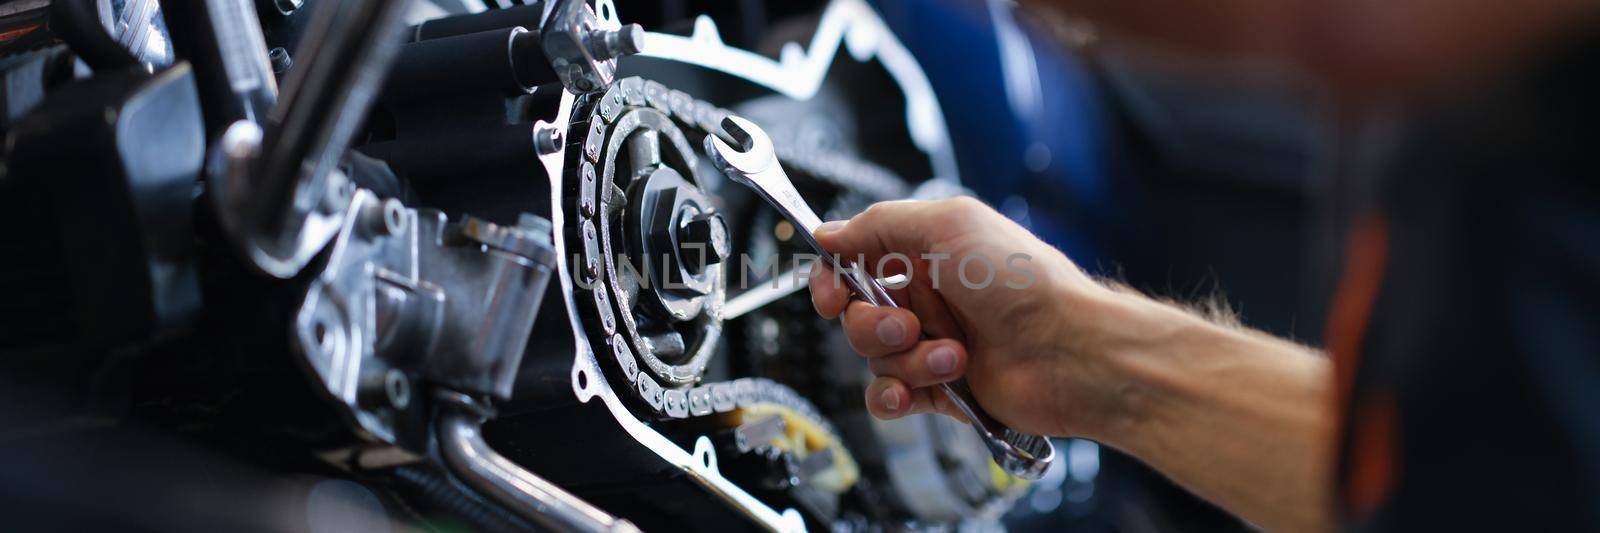 Master repairman repairing motorcycle with wrench closeup. Repair and maintenance of motorcycle equipment concept